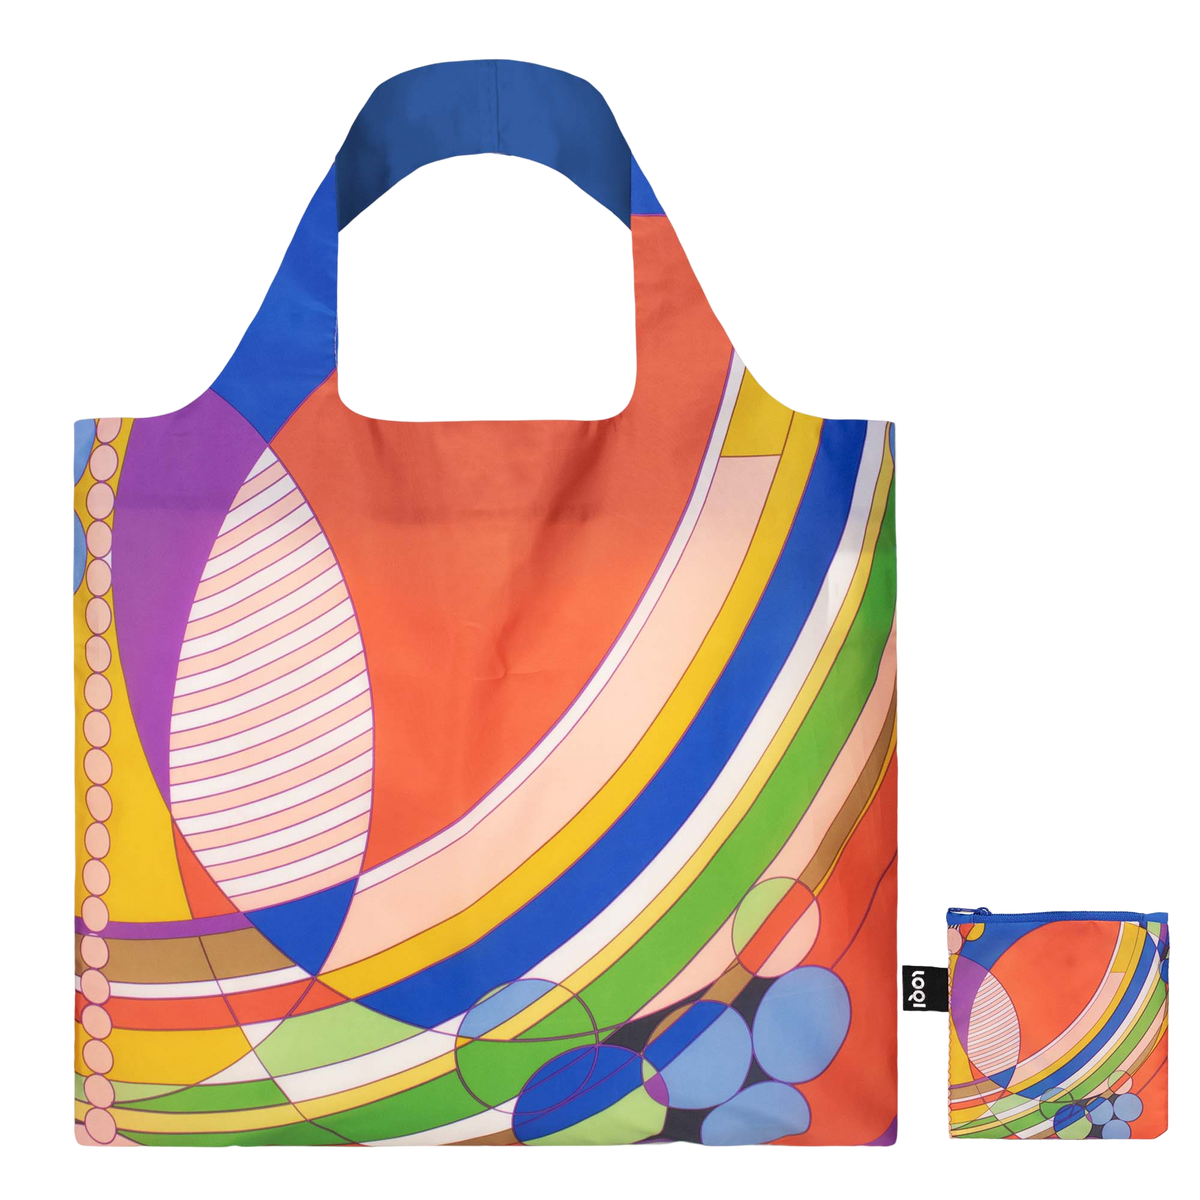 Frank Lloyd Wright March Balloons Reusable Tote Bag